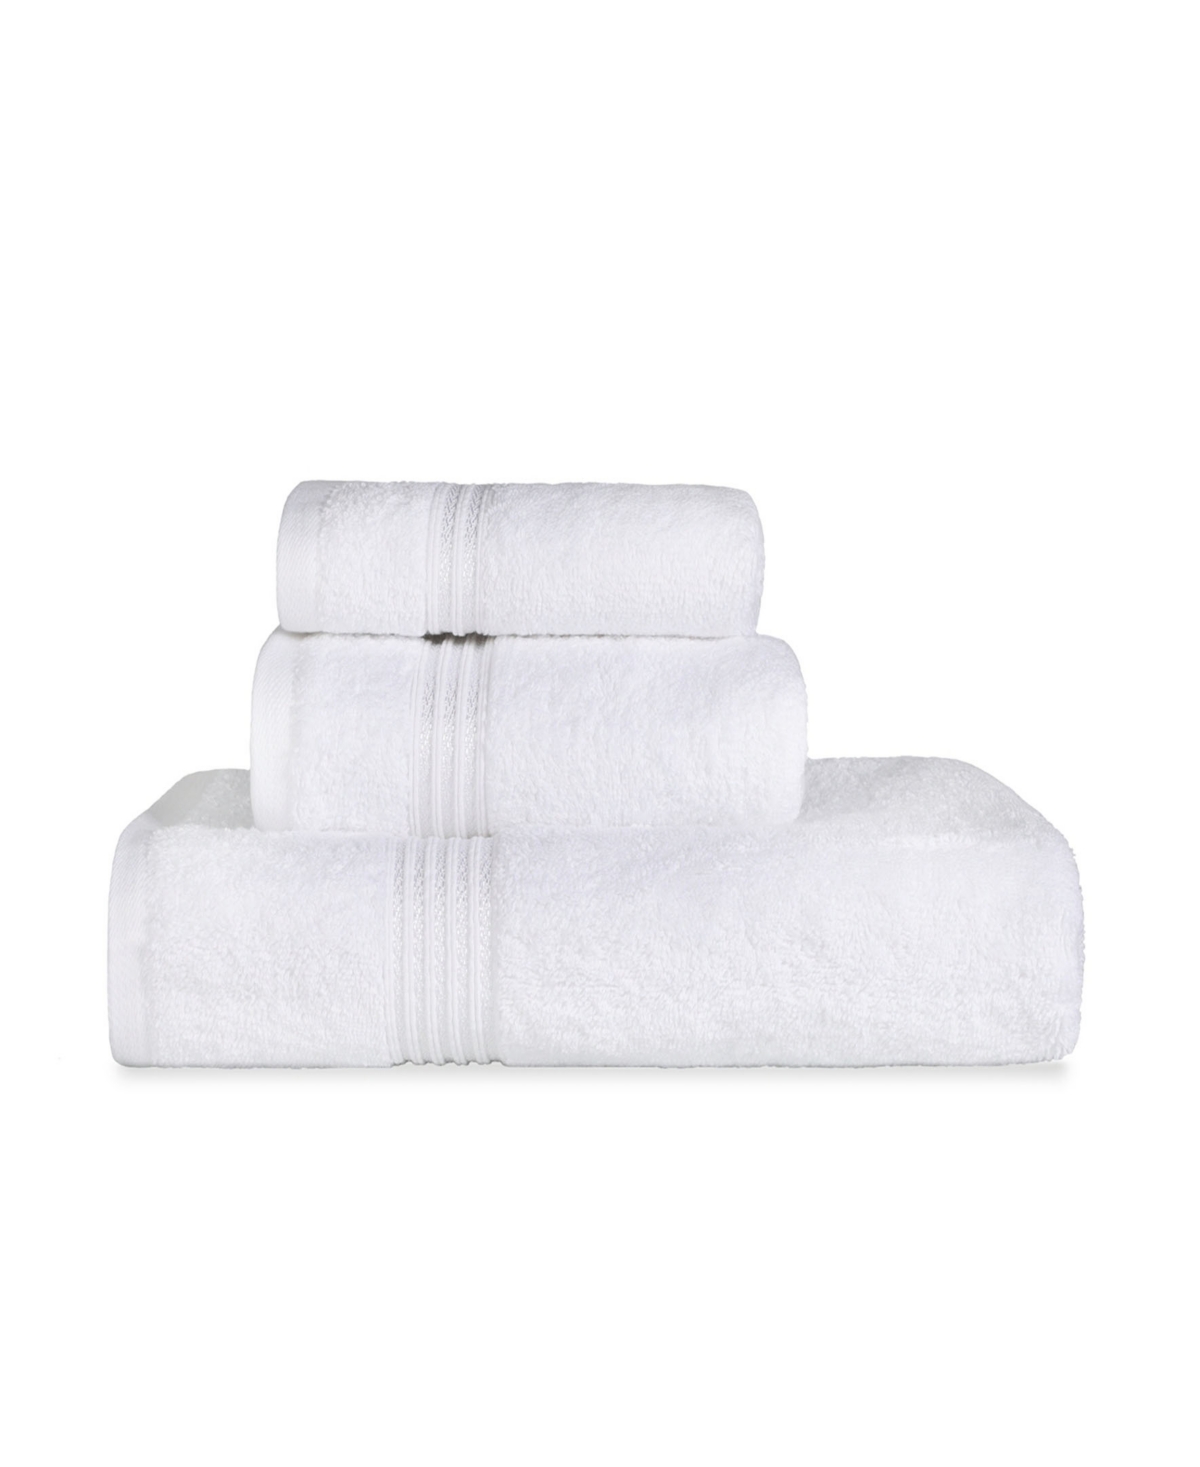 Superior Solid Quick Drying Absorbent 3 Piece Egyptian Cotton Assorted Towel Set Bedding In White